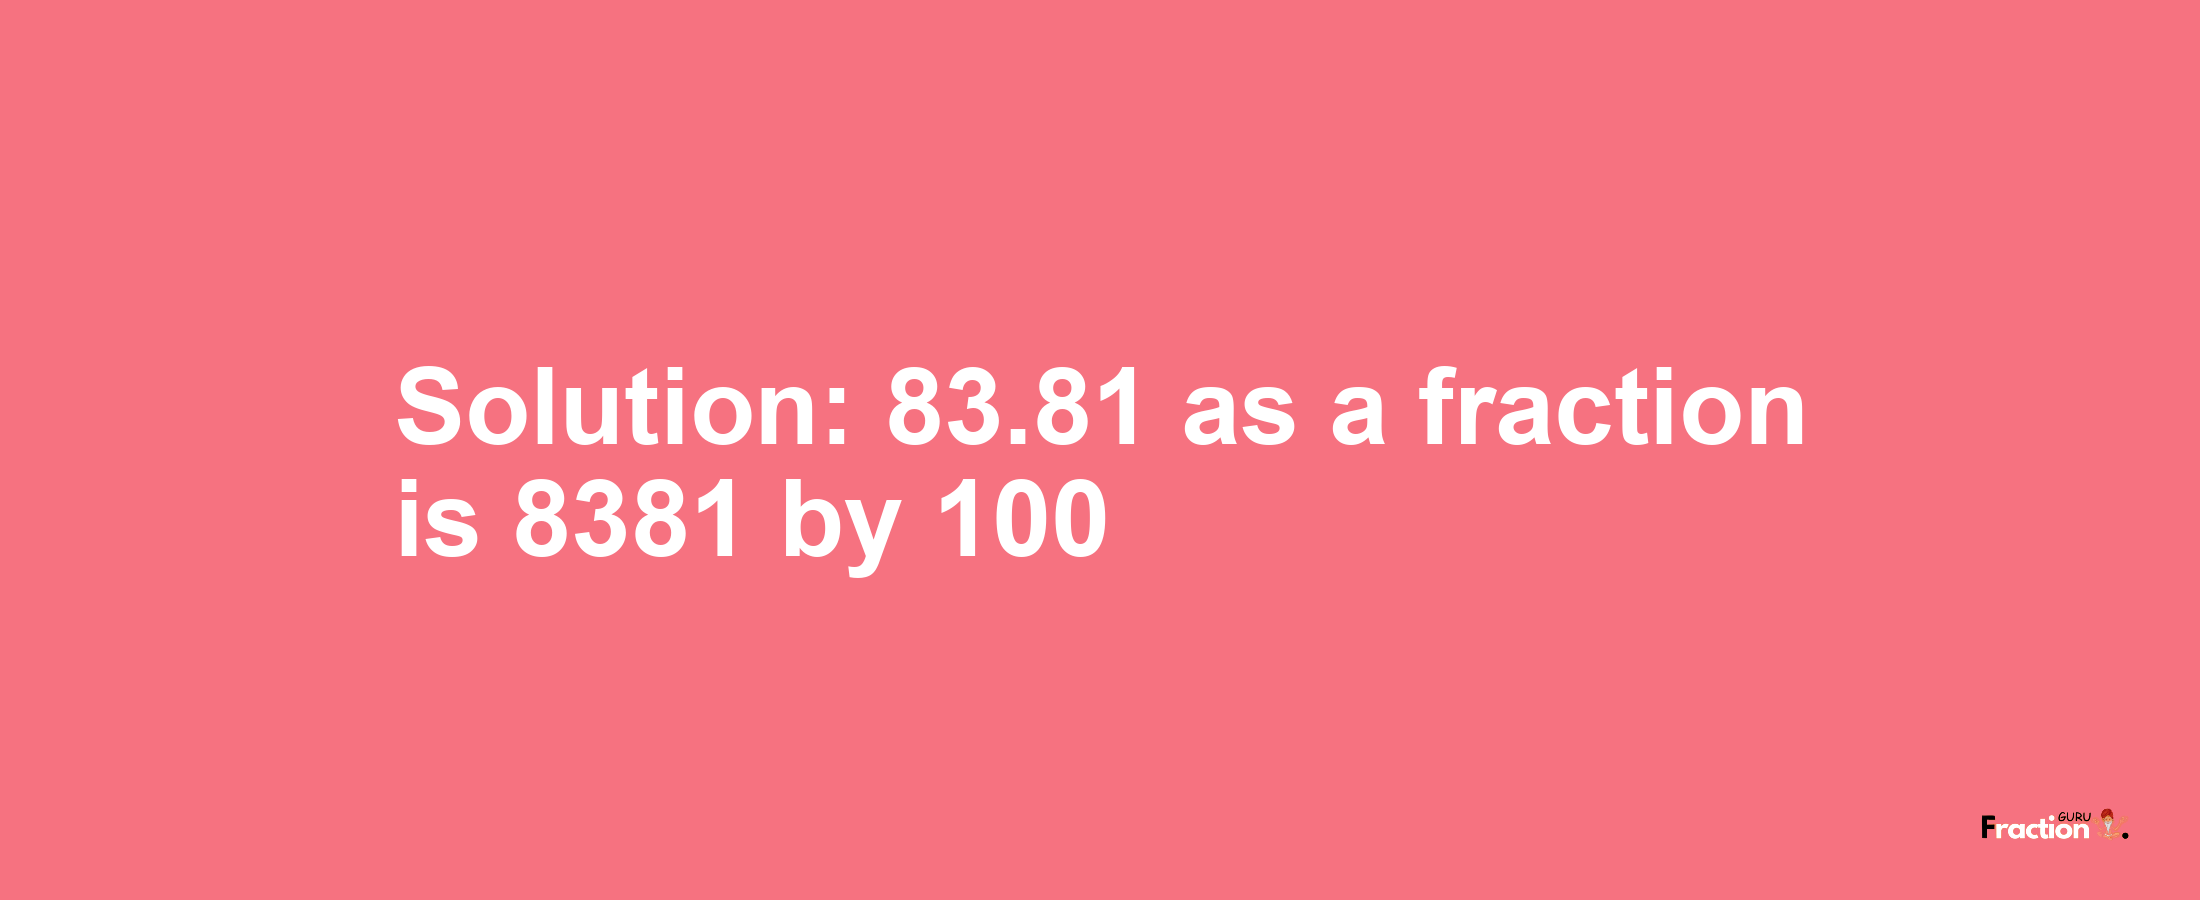 Solution:83.81 as a fraction is 8381/100